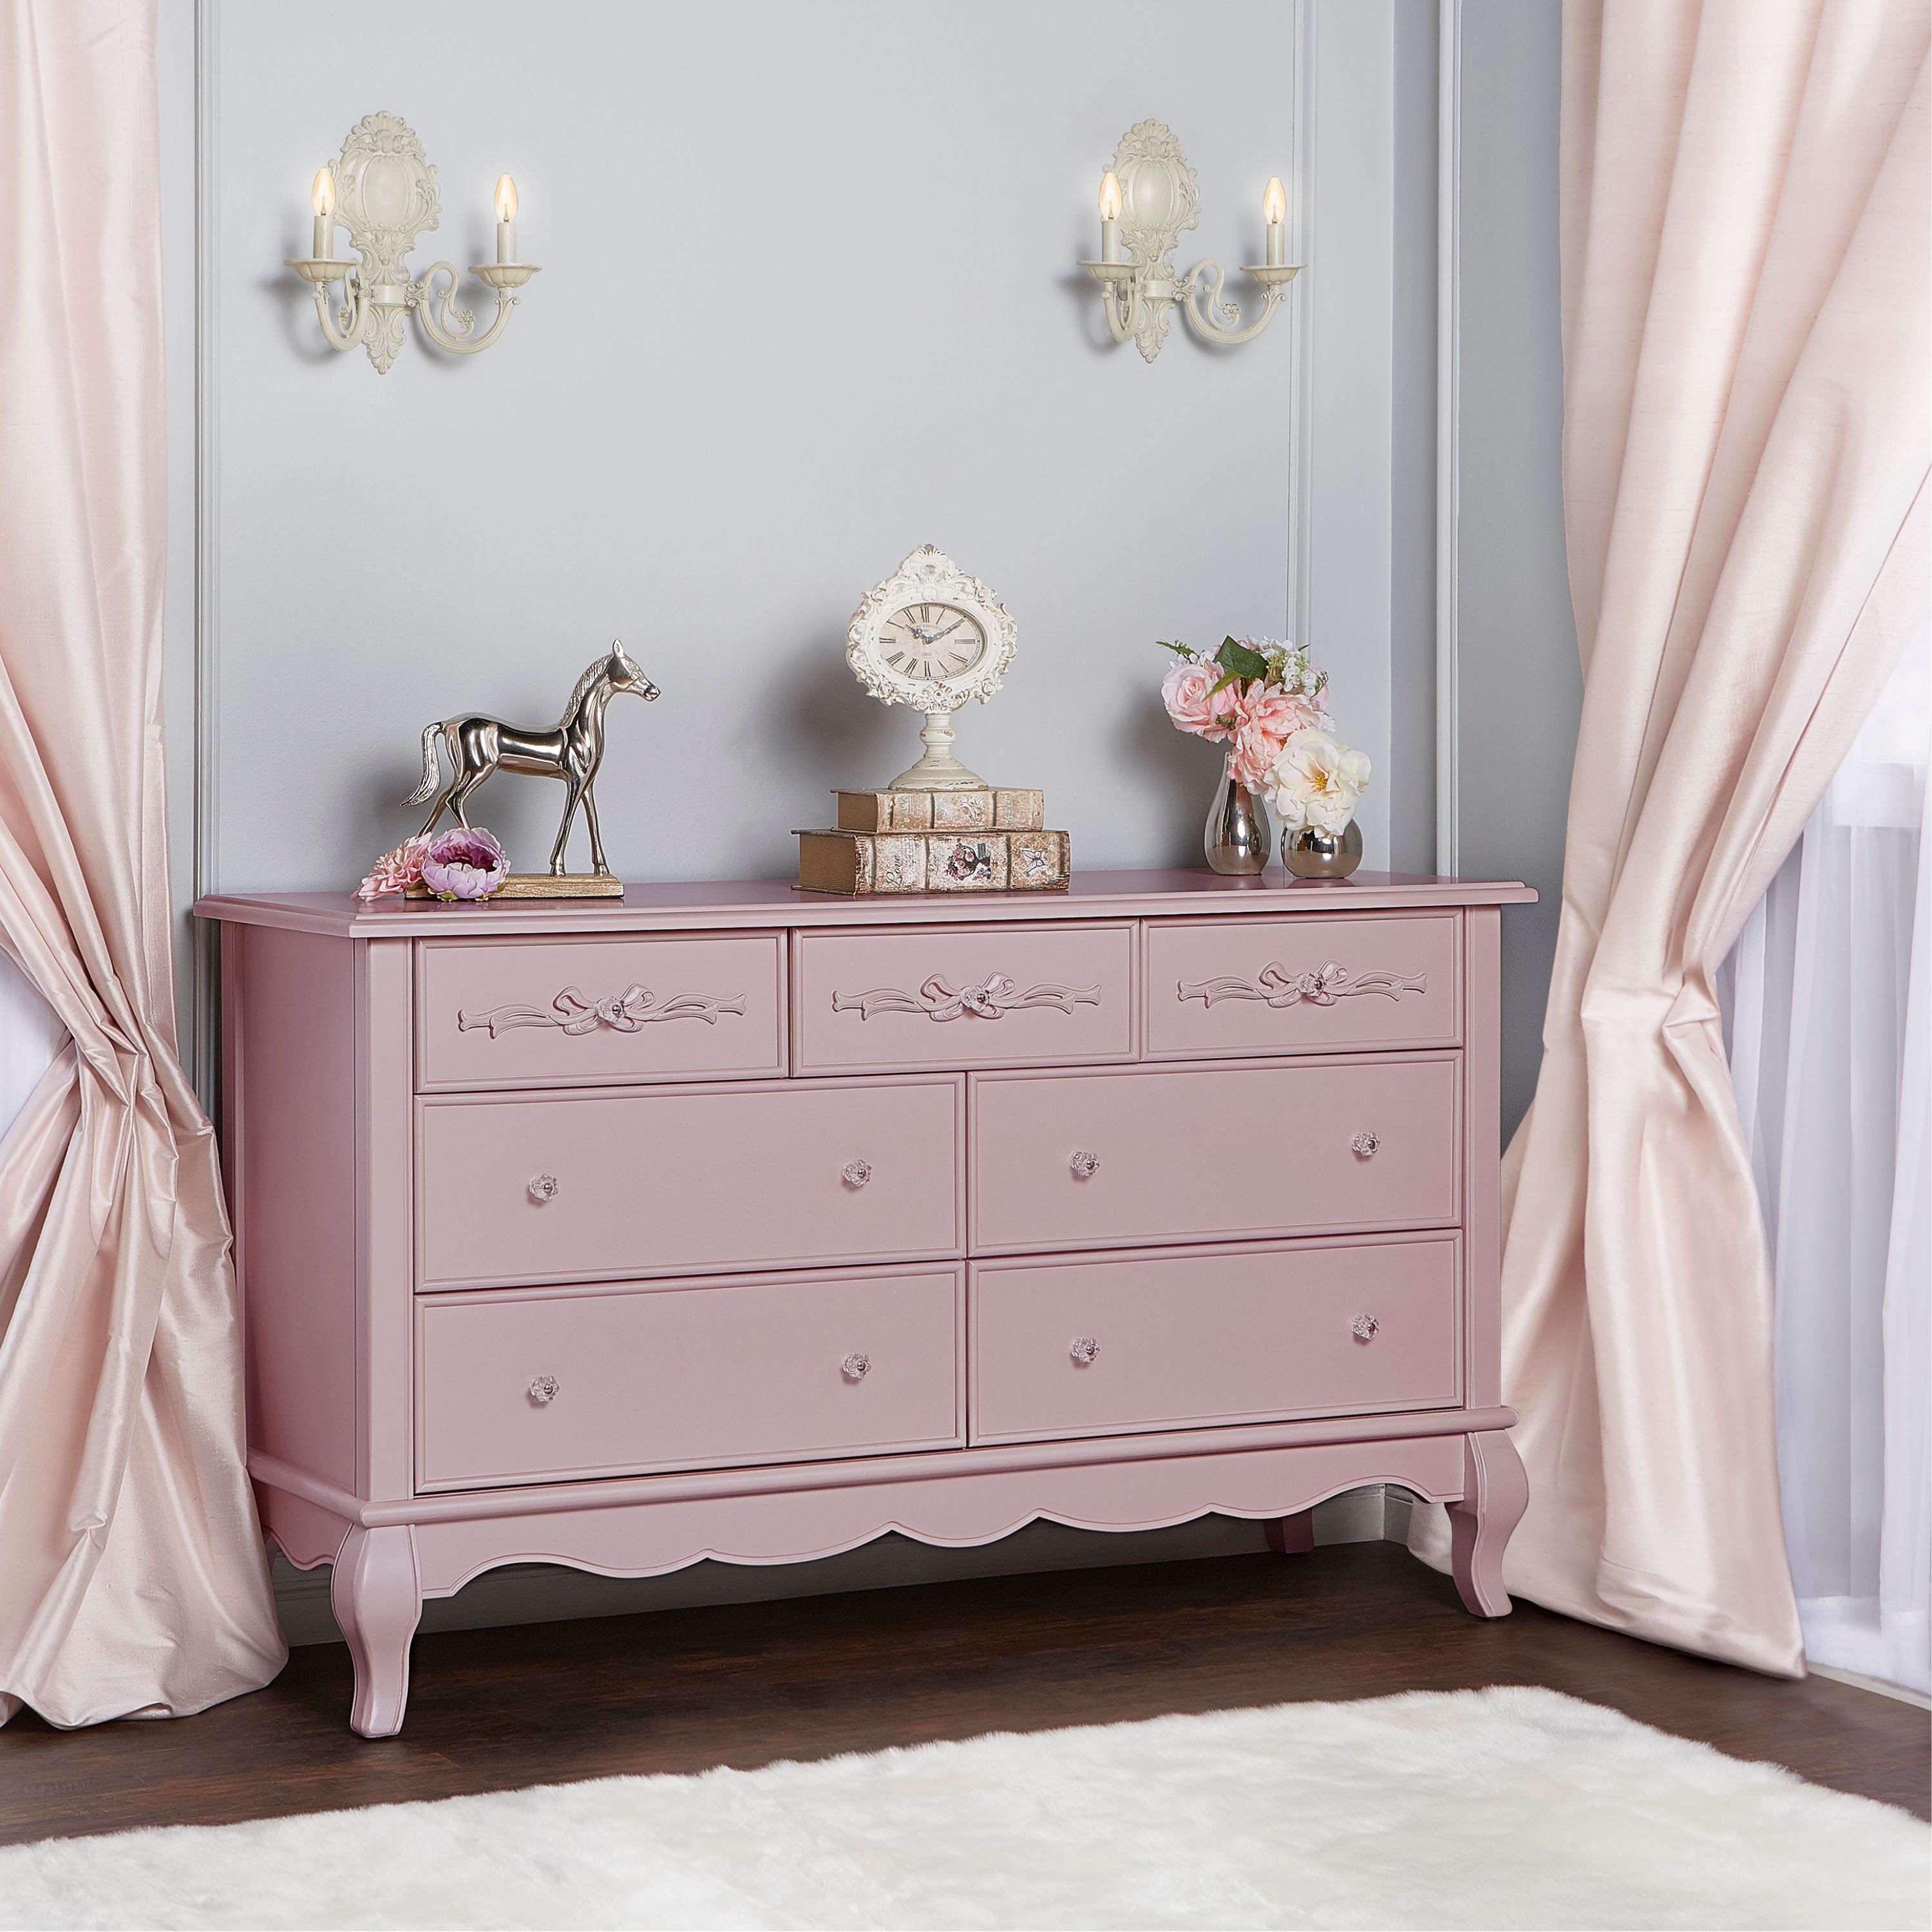 Evolur Aurora 7-Drawer Double Dresser, Dusty Rose, Spacious Drawers - image 2 of 9